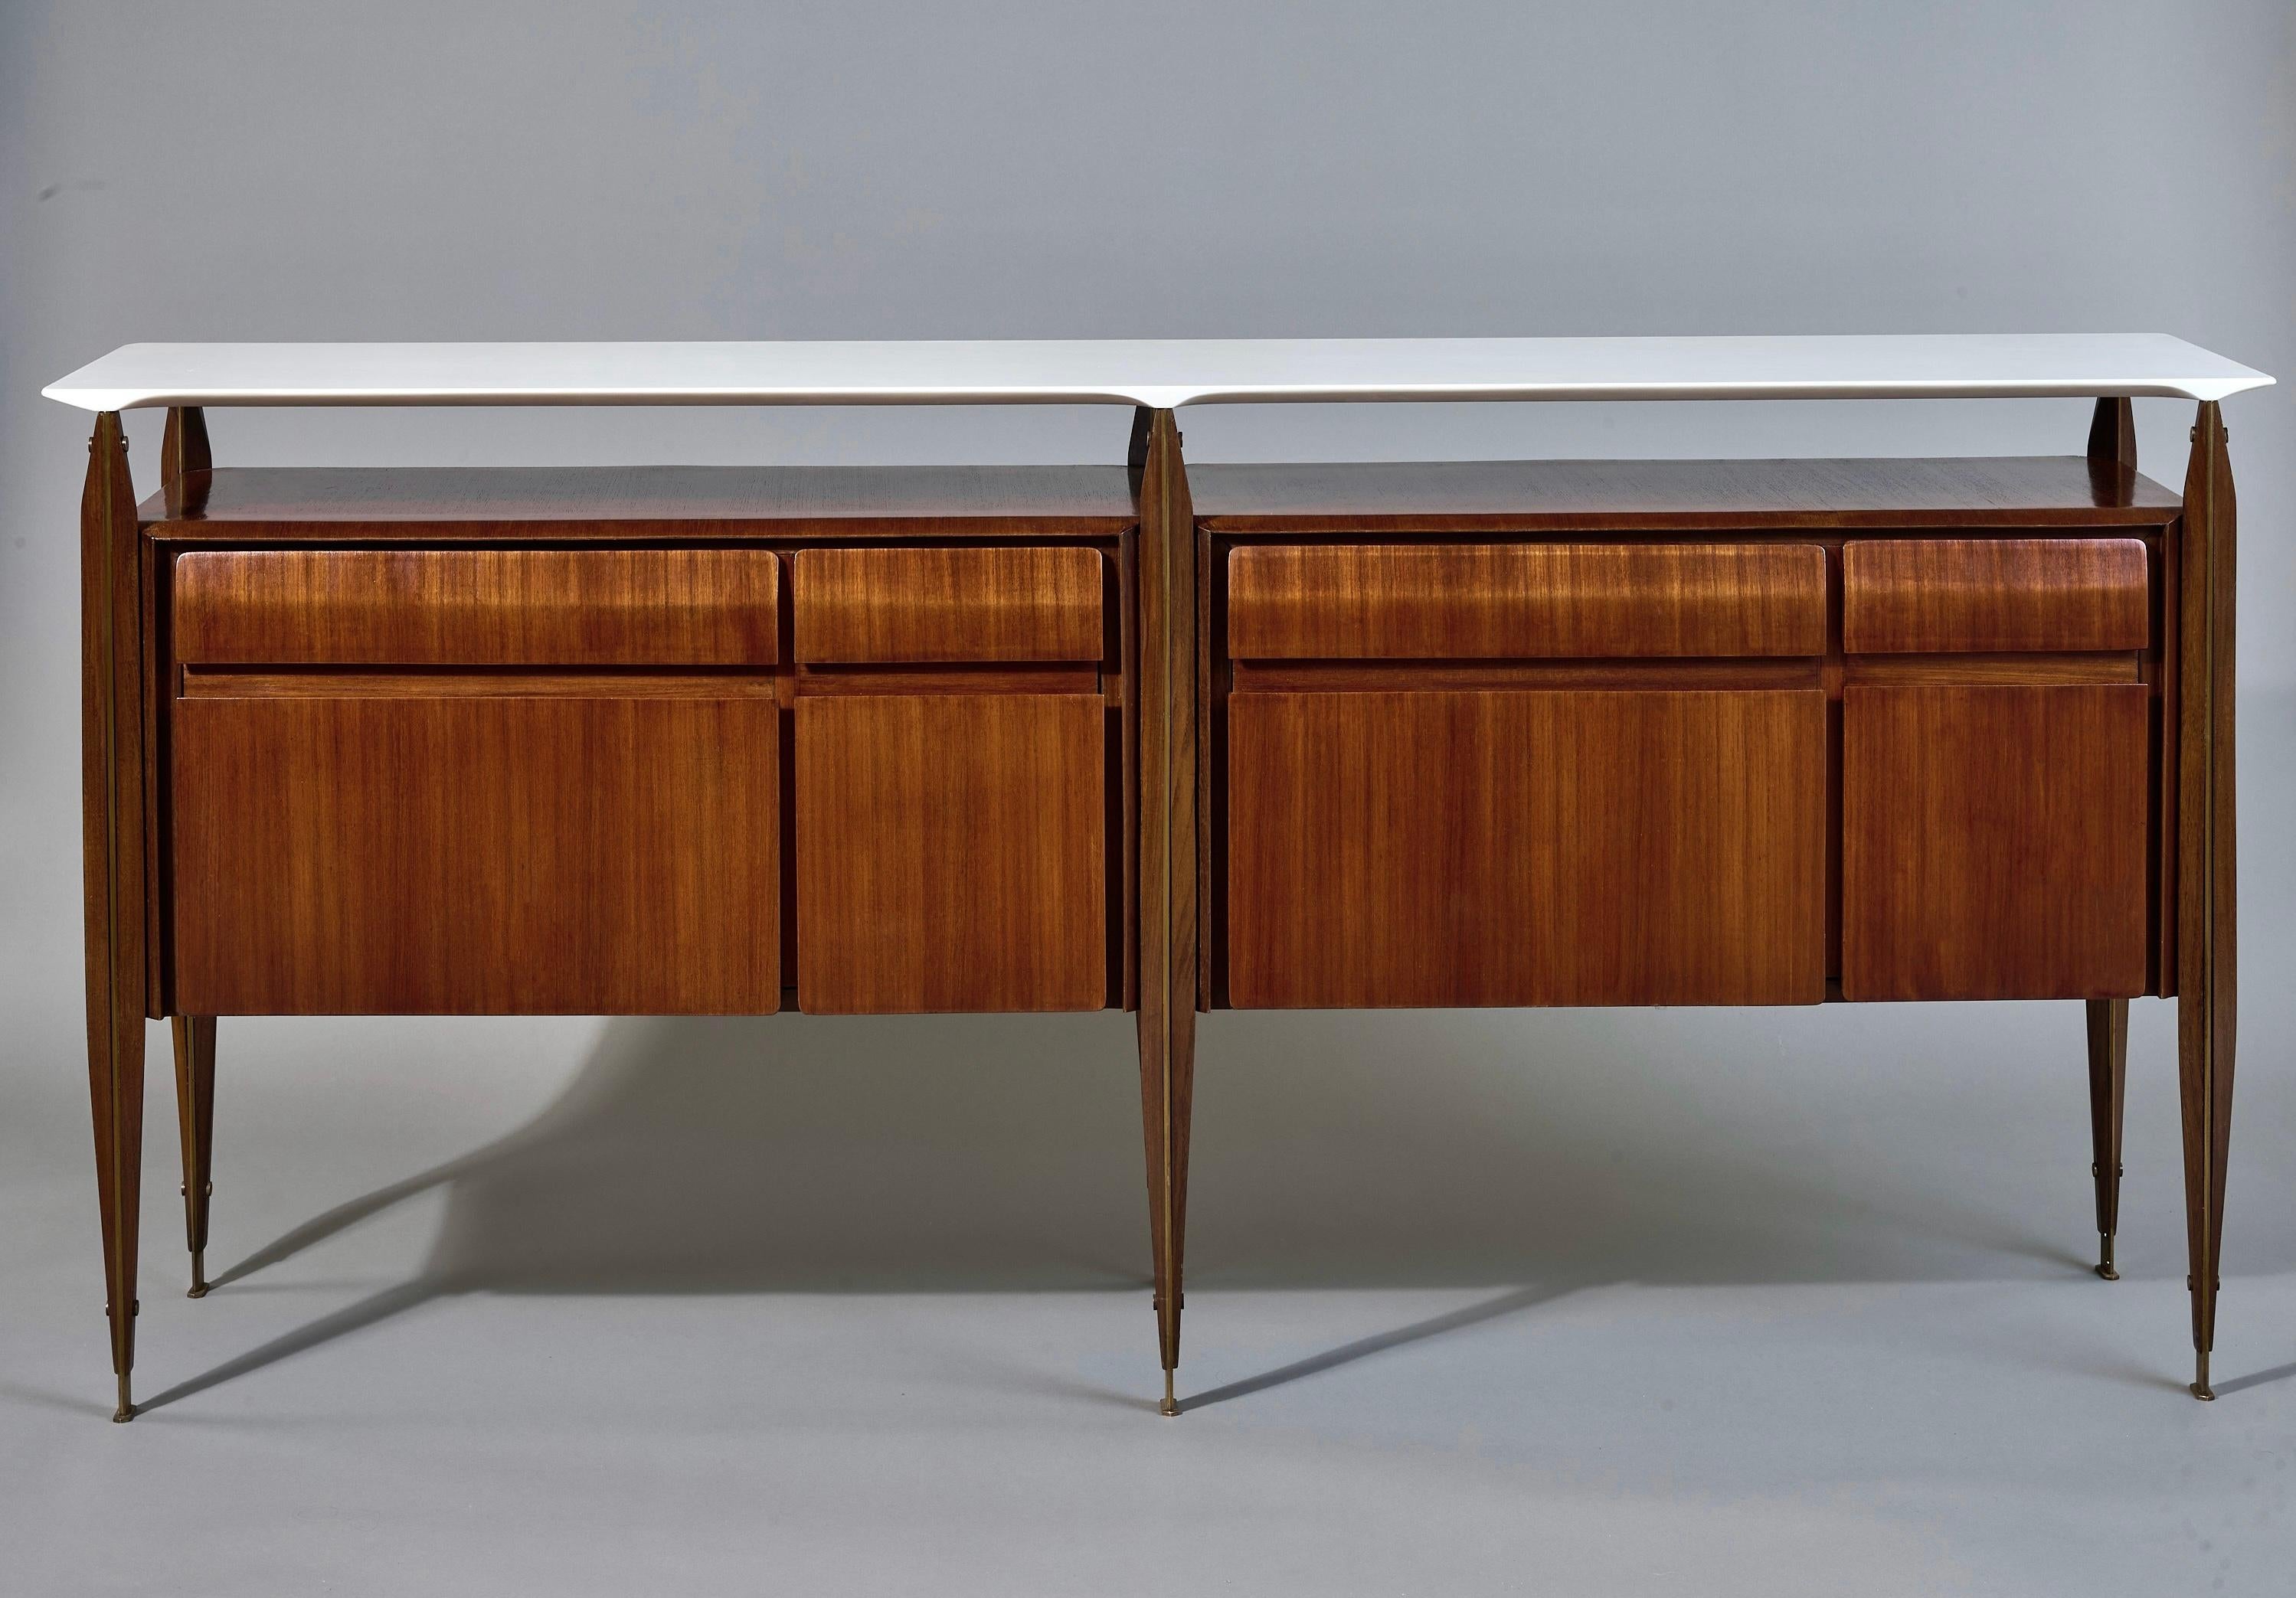 Italy, 1950's

A large and exceptional sideboard in rosewood with a floating white marble top and brass detailing. The cabinet features an elegantly soaring, three-dimensionally sculpted marble plateau with skillfully carved divots that gracefully